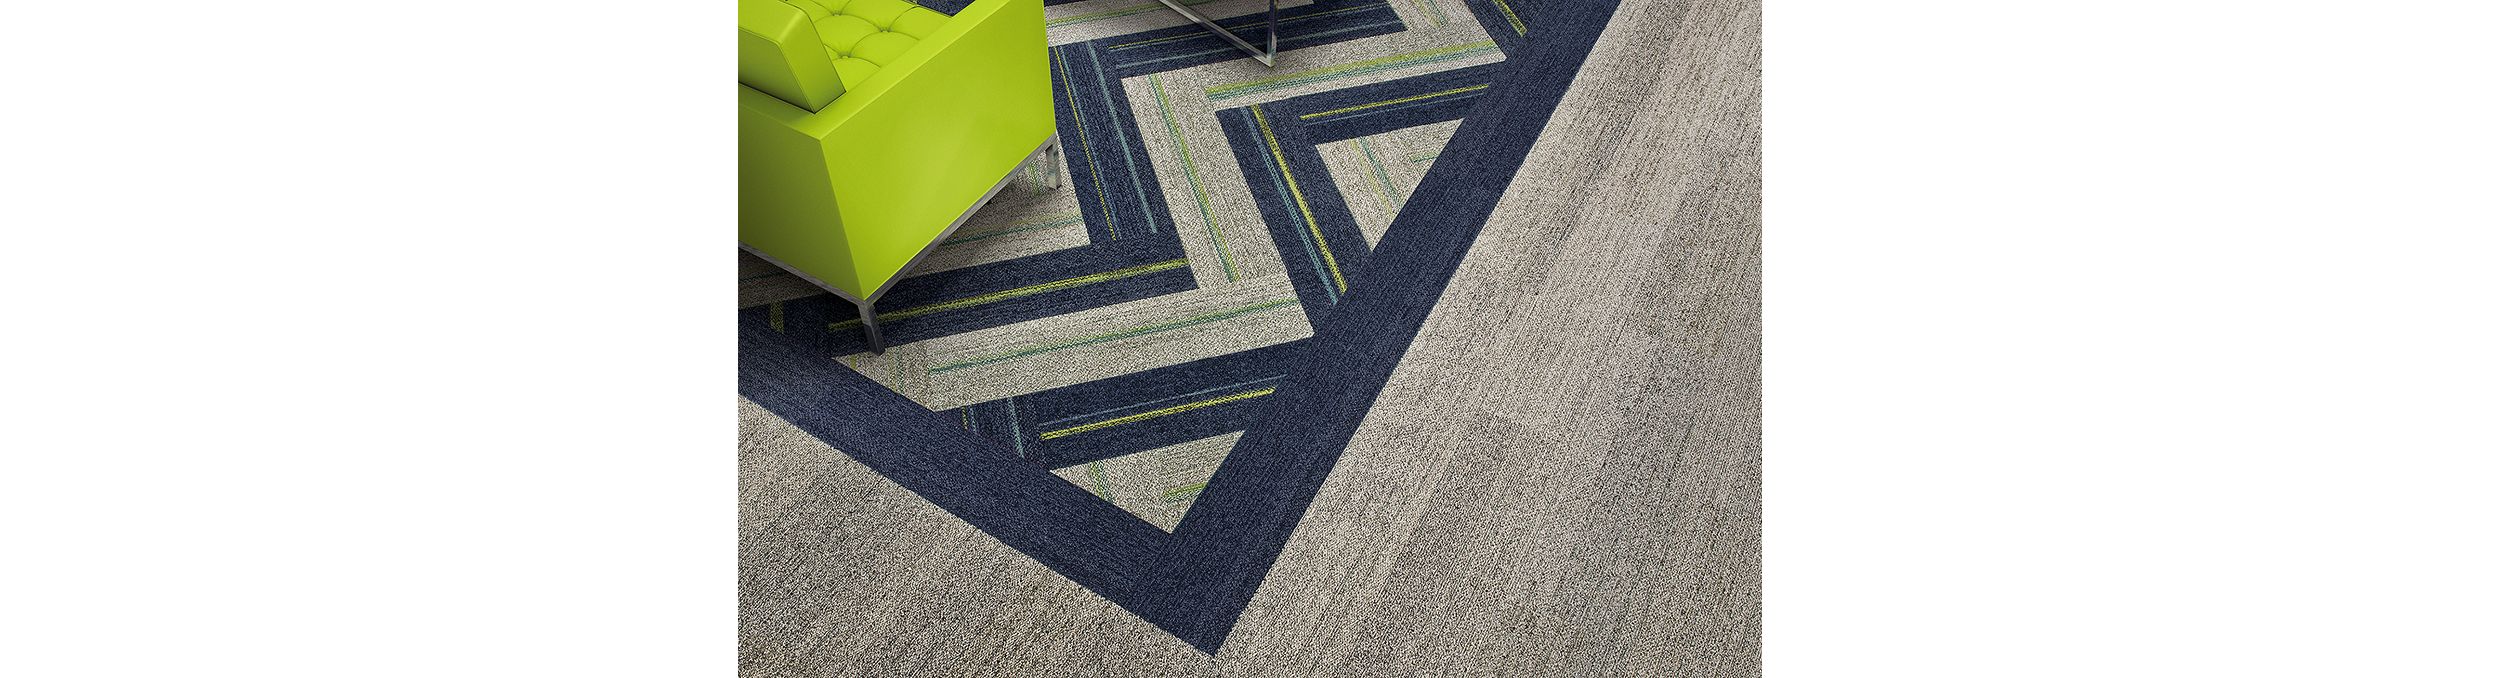 Interface Harmonize and Ground Waves plank carpet tiles with neon green chair imagen número 3